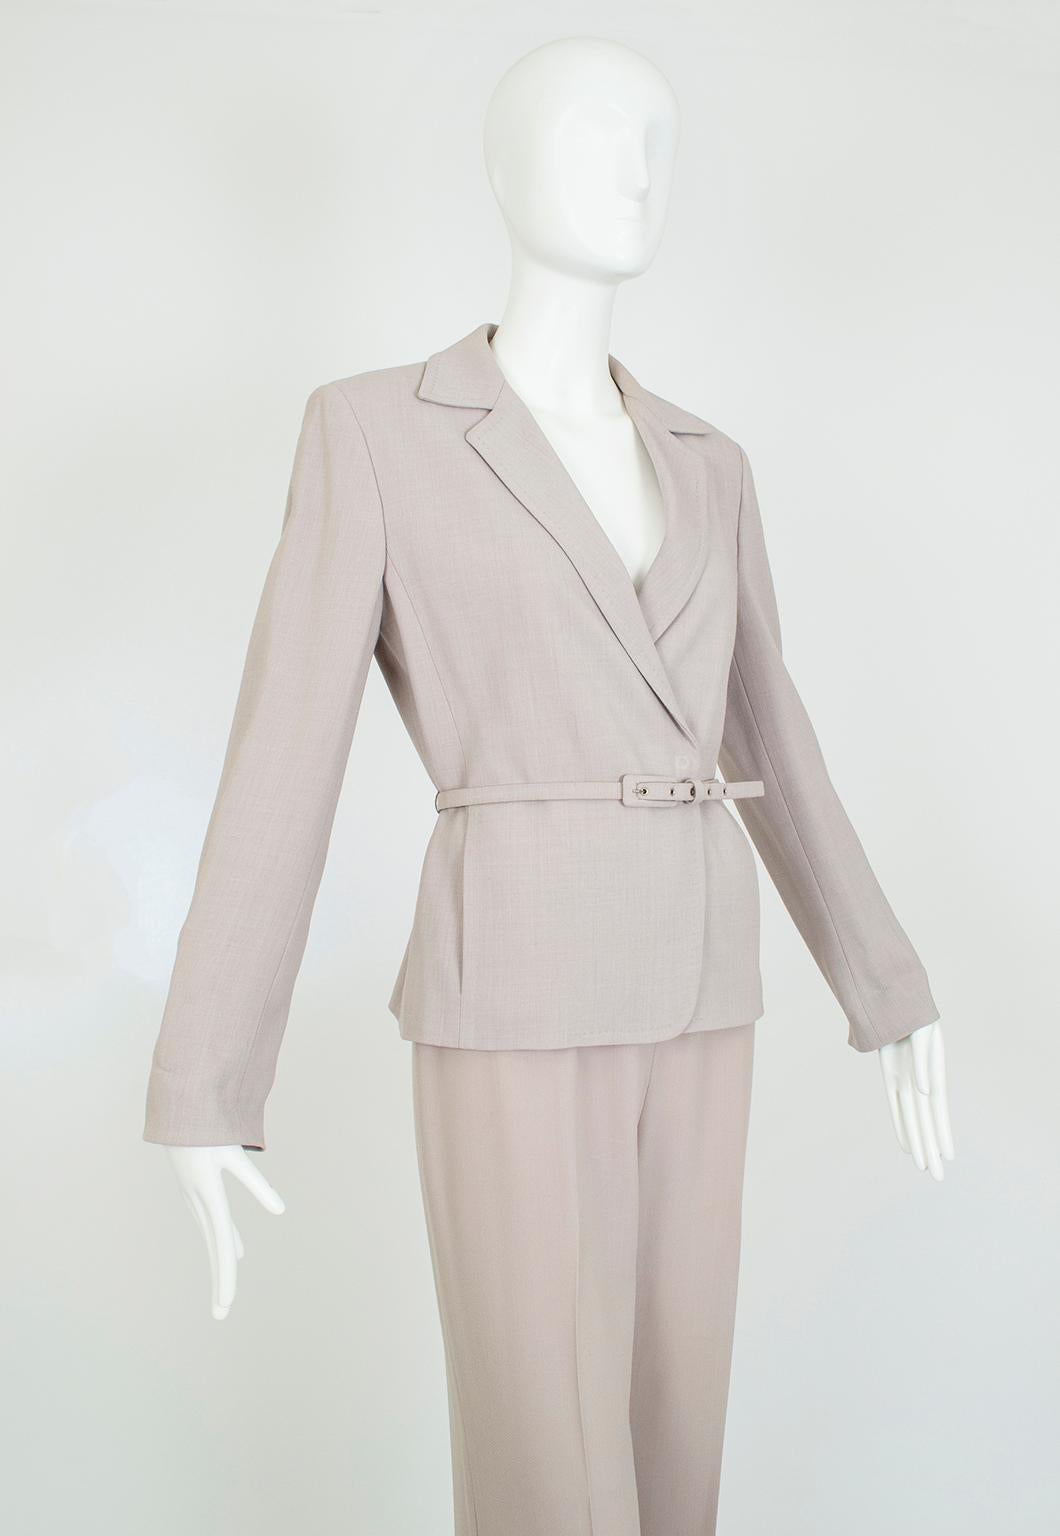 Max Mara Taupe Wool and Silk Crêpe Belted Pant Suit - It 40 – 42, 1990s In Good Condition For Sale In Tucson, AZ